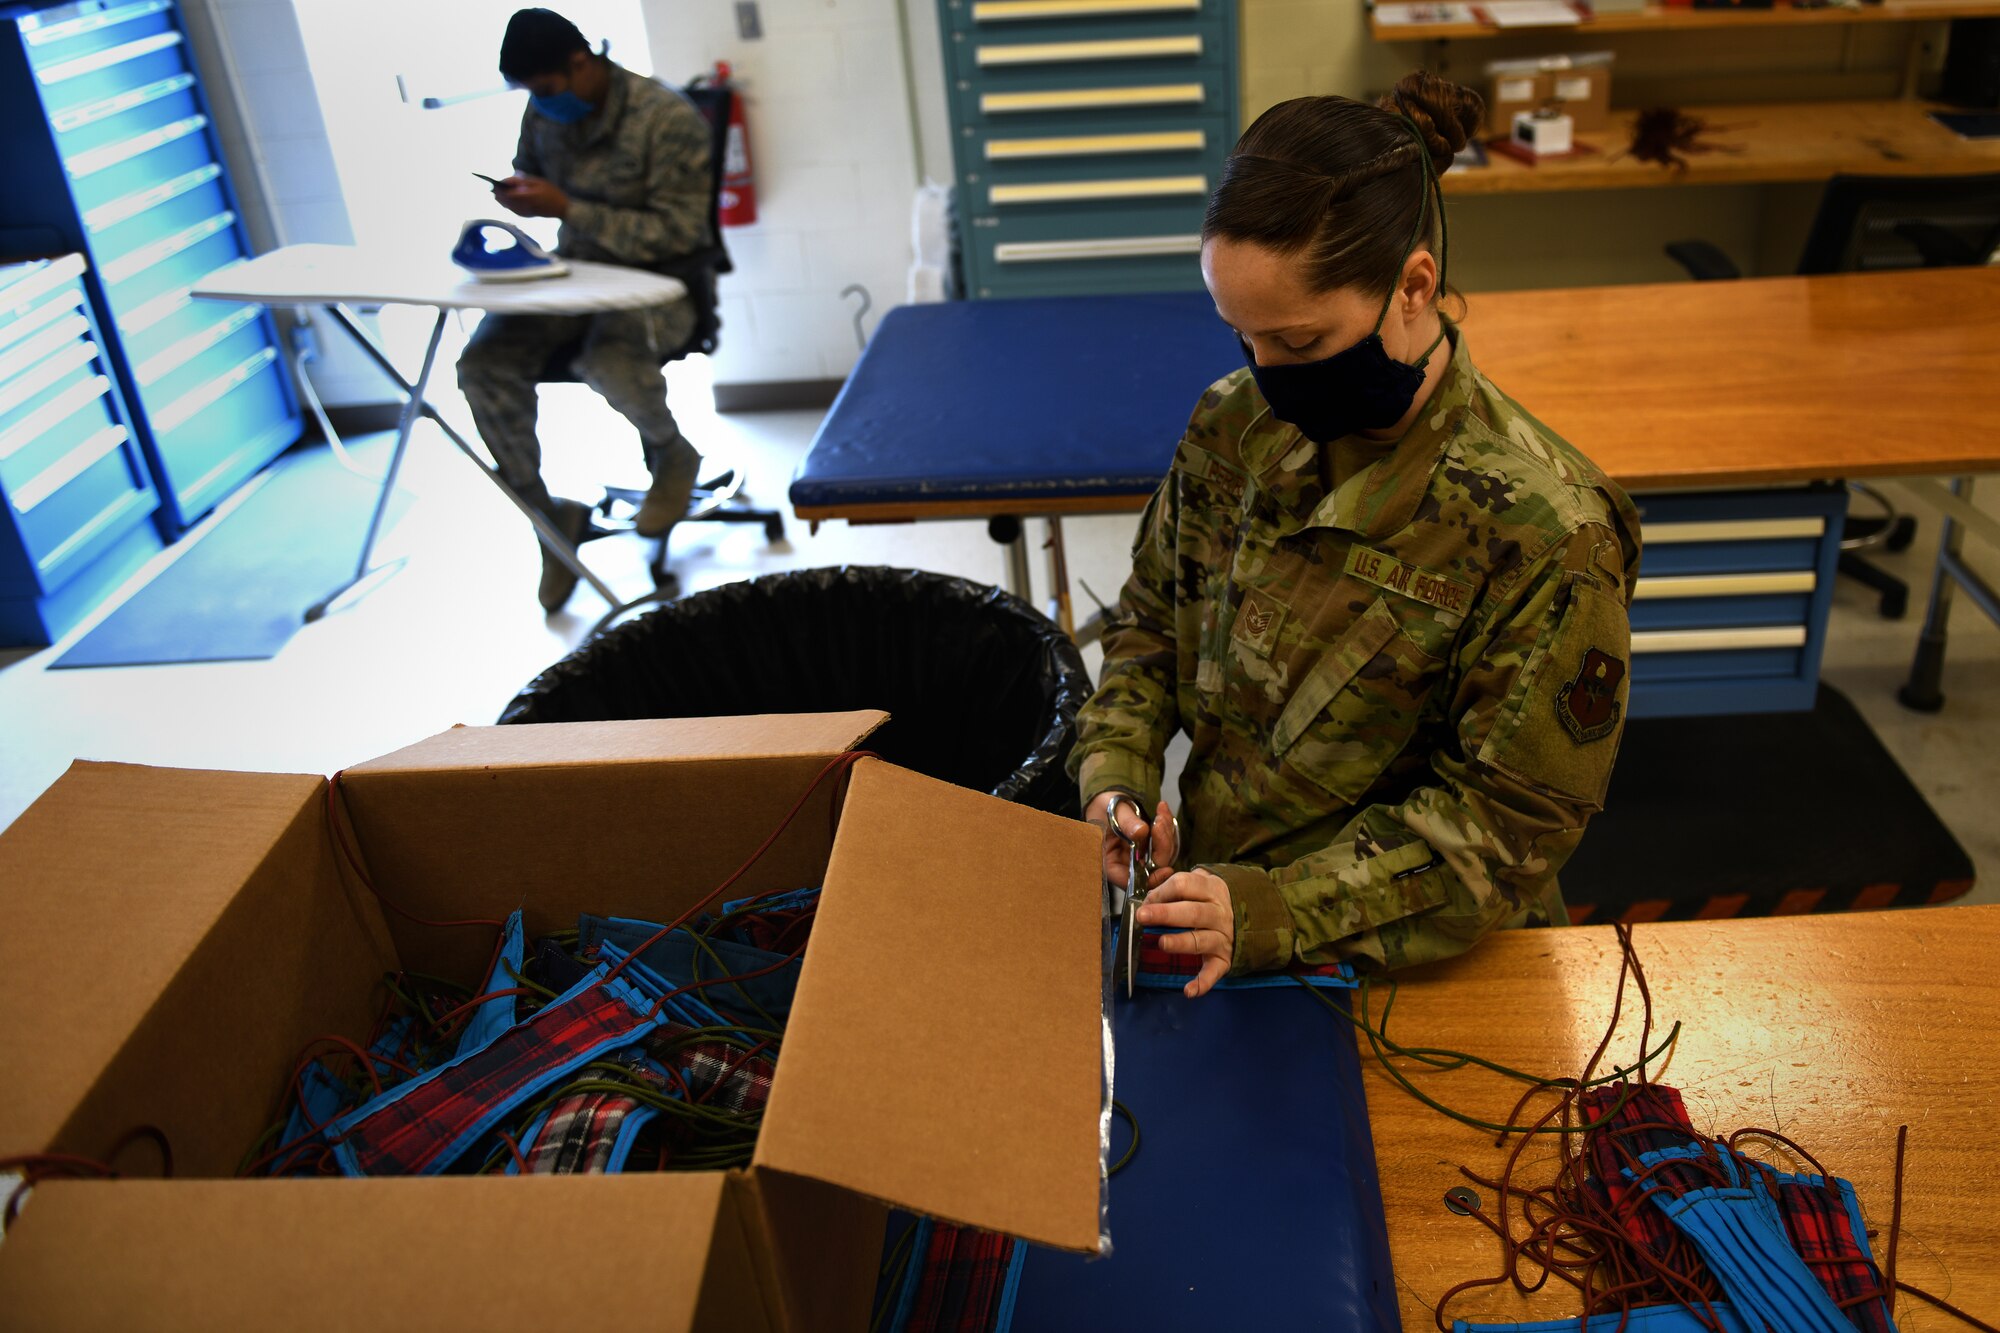 ALTUS AIR FORCE BASE, Okla. – U.S. Air Force Tech. Sgt. Skye Perry, an Air Crew Flight Equipment (AFE) craftsman assigned to the 97th Operations Support Squadron, trims threads off of face masks for base members, April 6, 2020 at Altus Air Force Base Oklahoma.